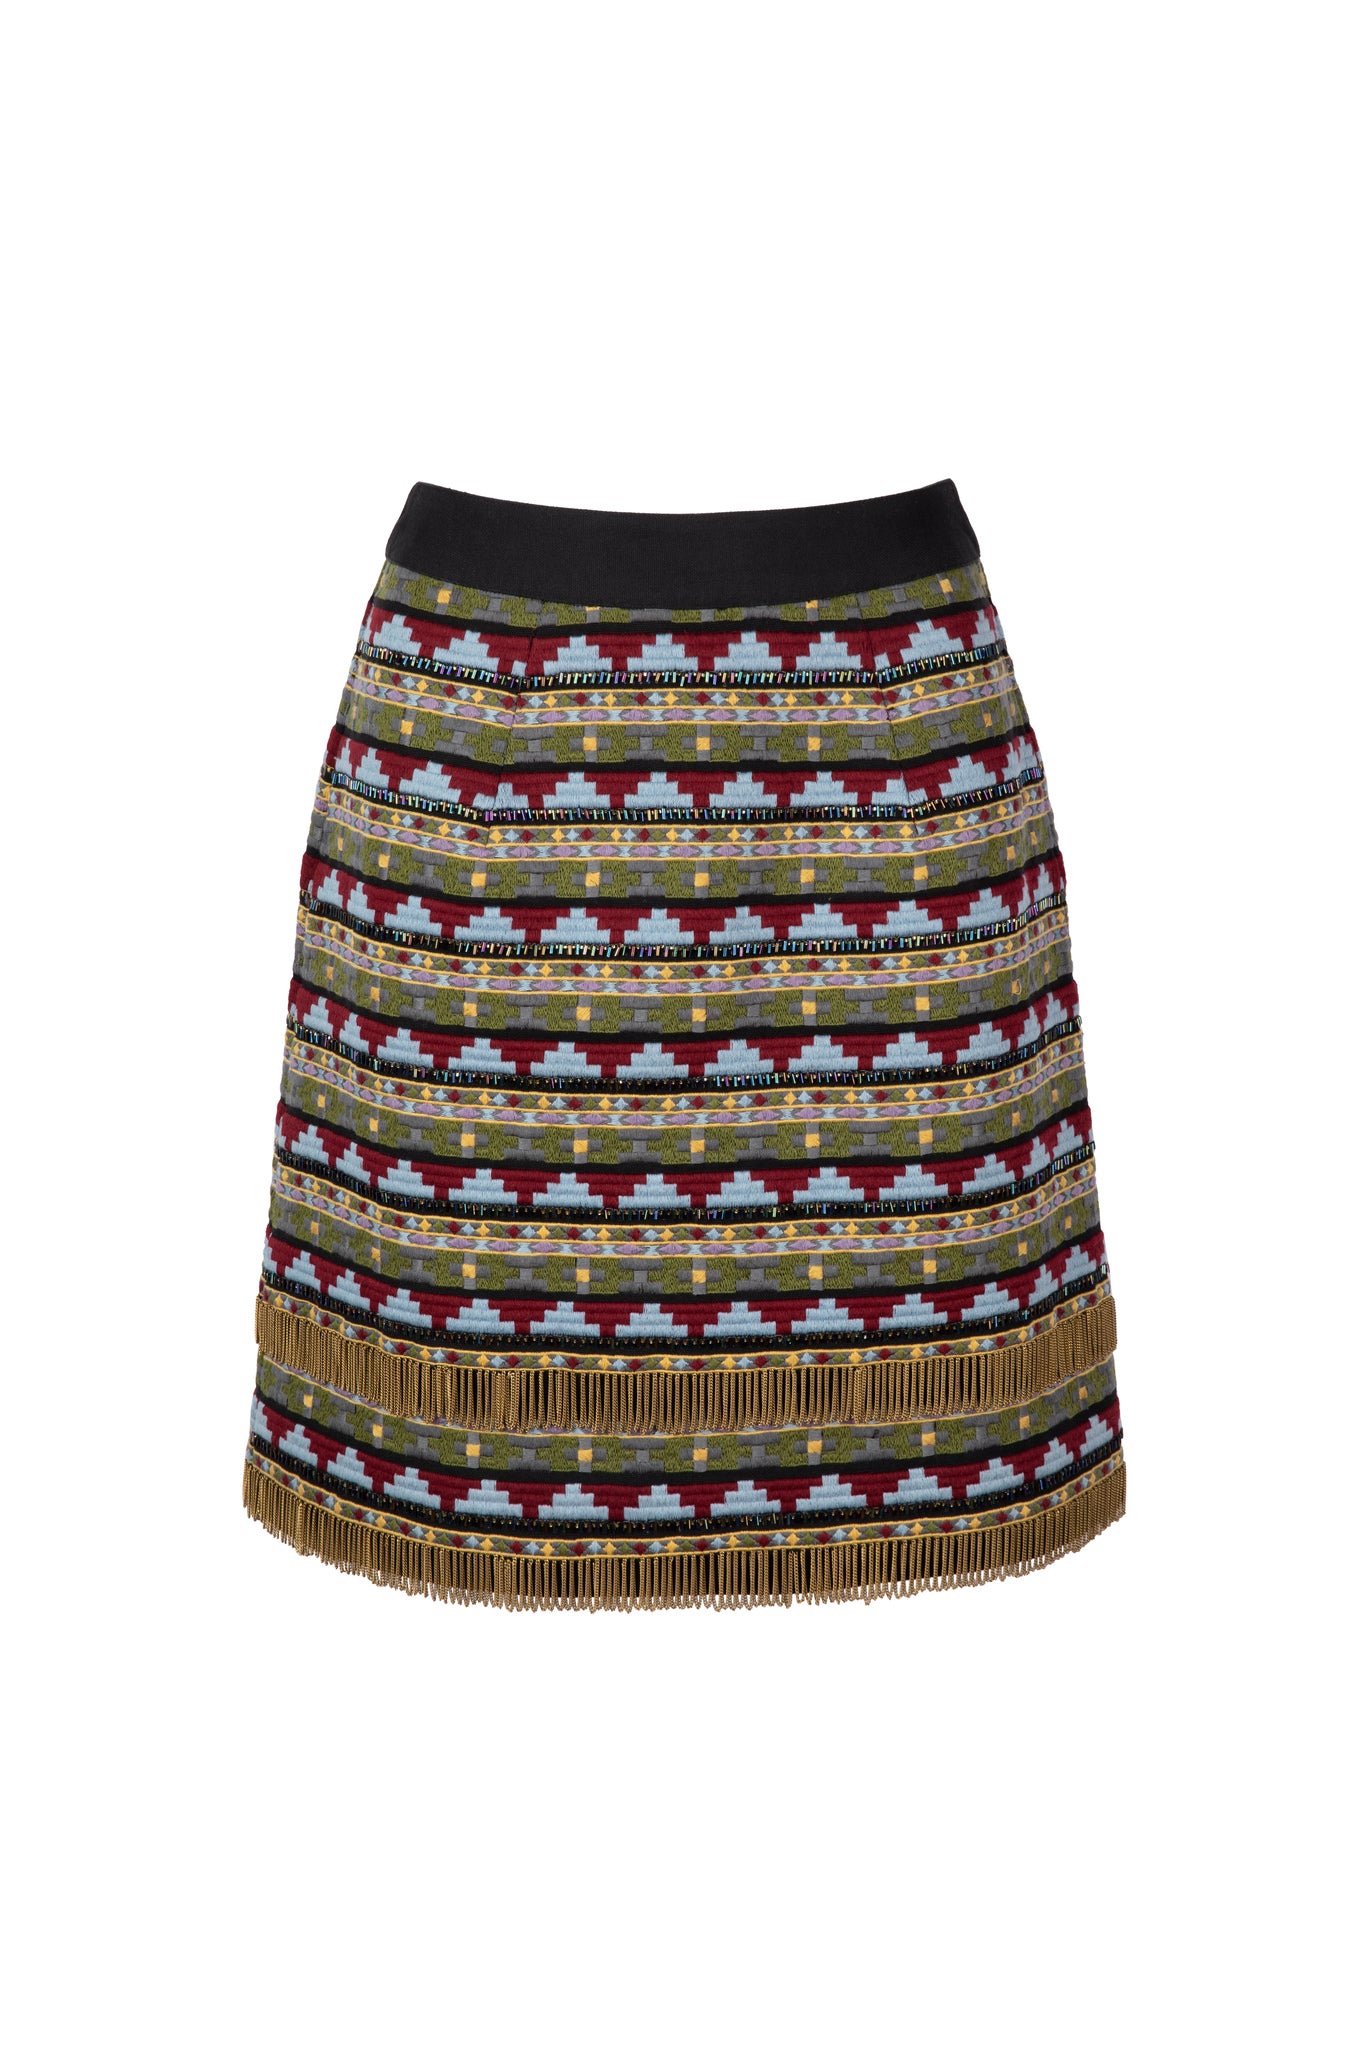 A-line skirt with geometric embroidery design, metallic beads and gold chain fringe